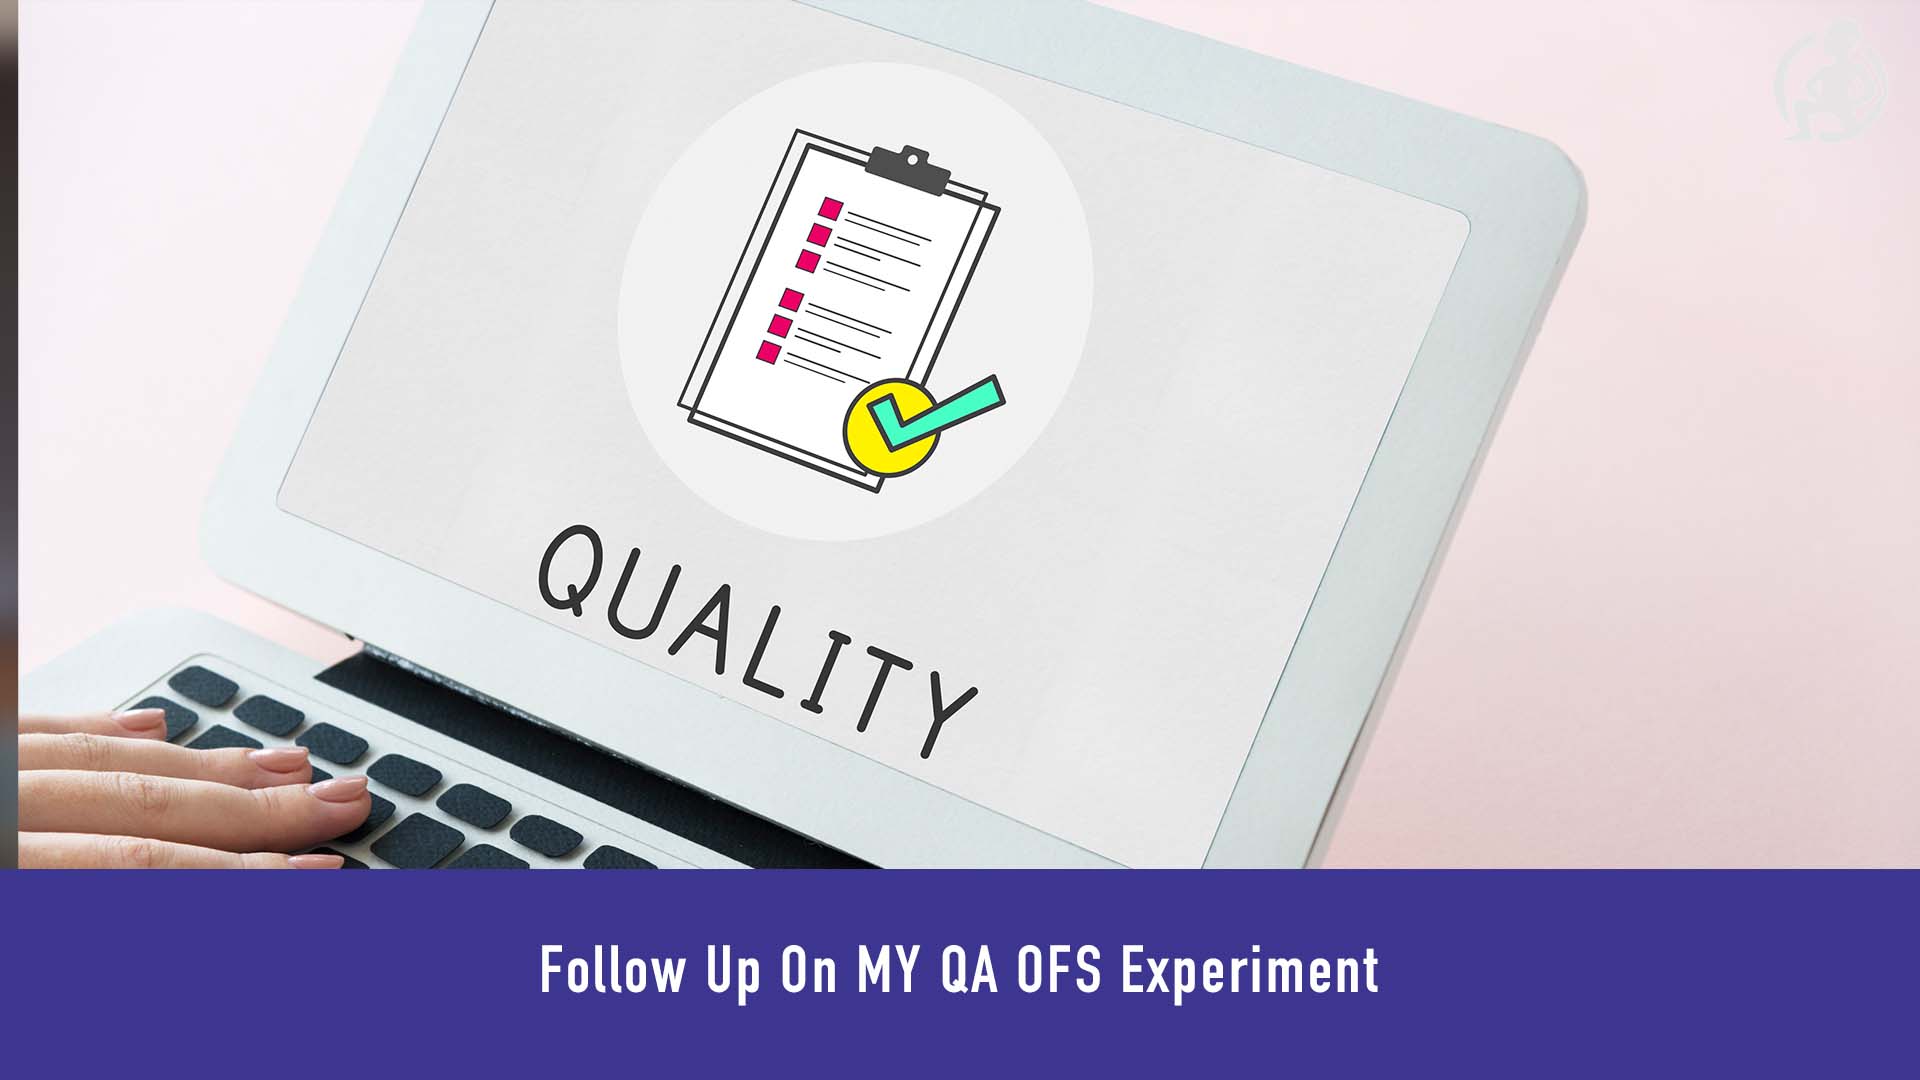 Follow Up On MY QA OFS Experiment Feature